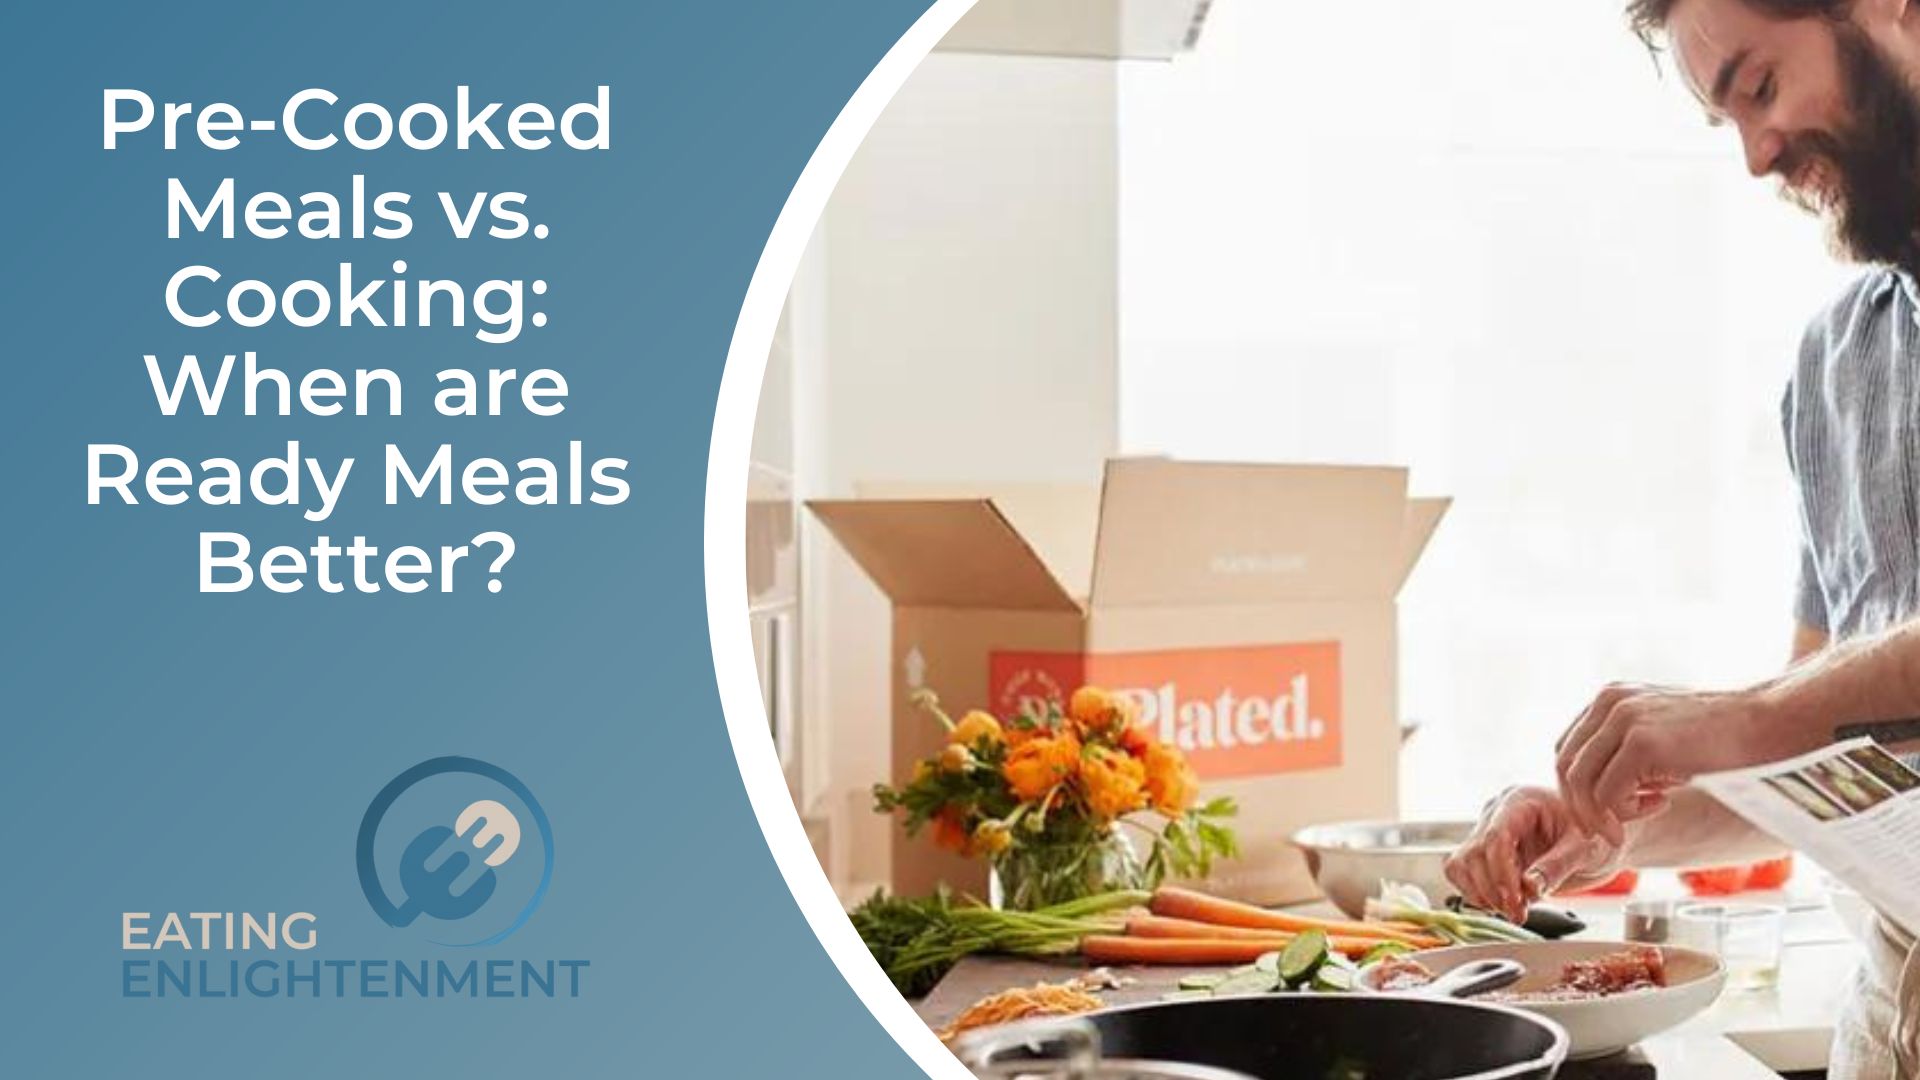 Pre-Cooked Meals vs. Cooking When are Ready Meals Better